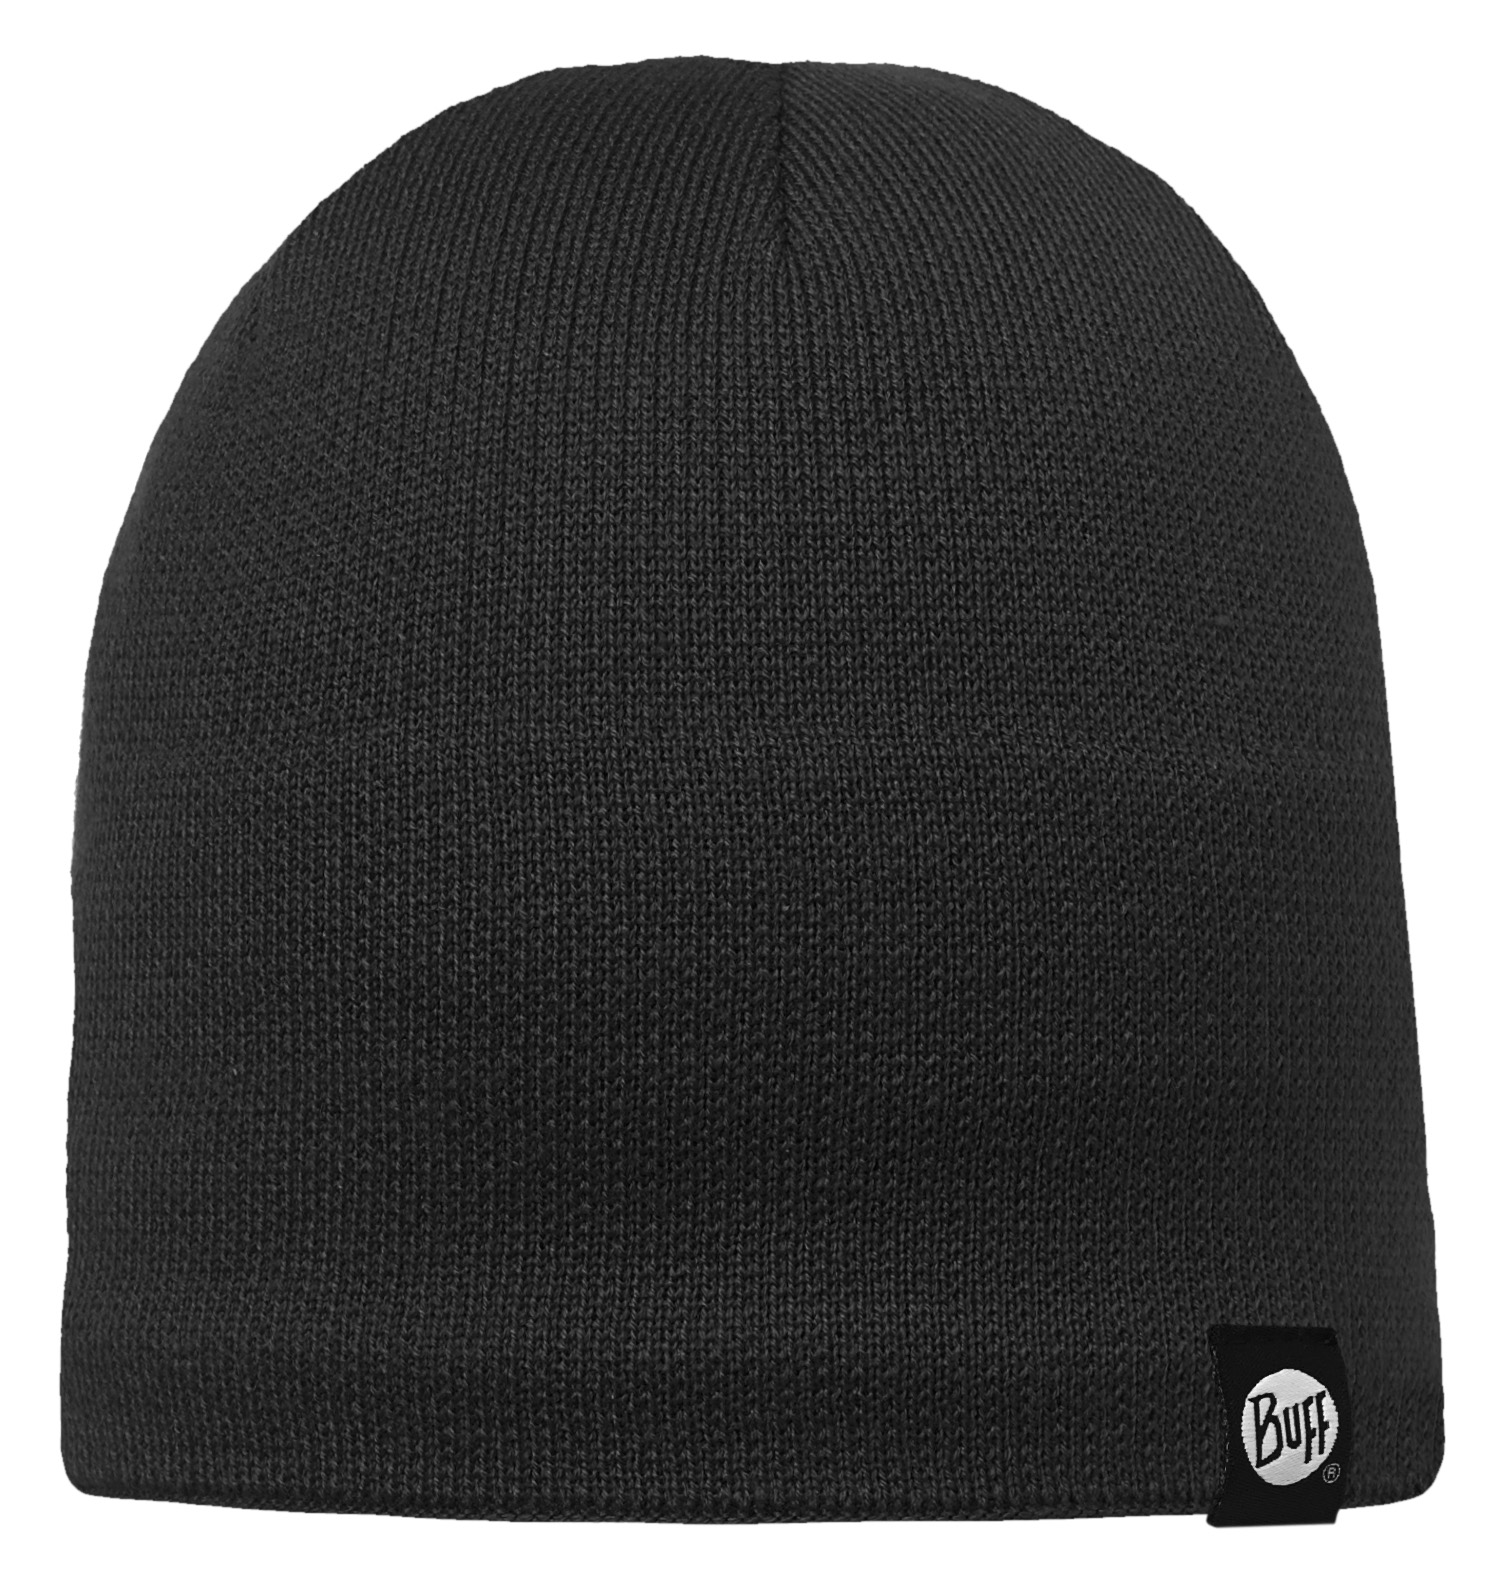 BUFF KNITTED & POLAR HAT - BLACK - SOLID